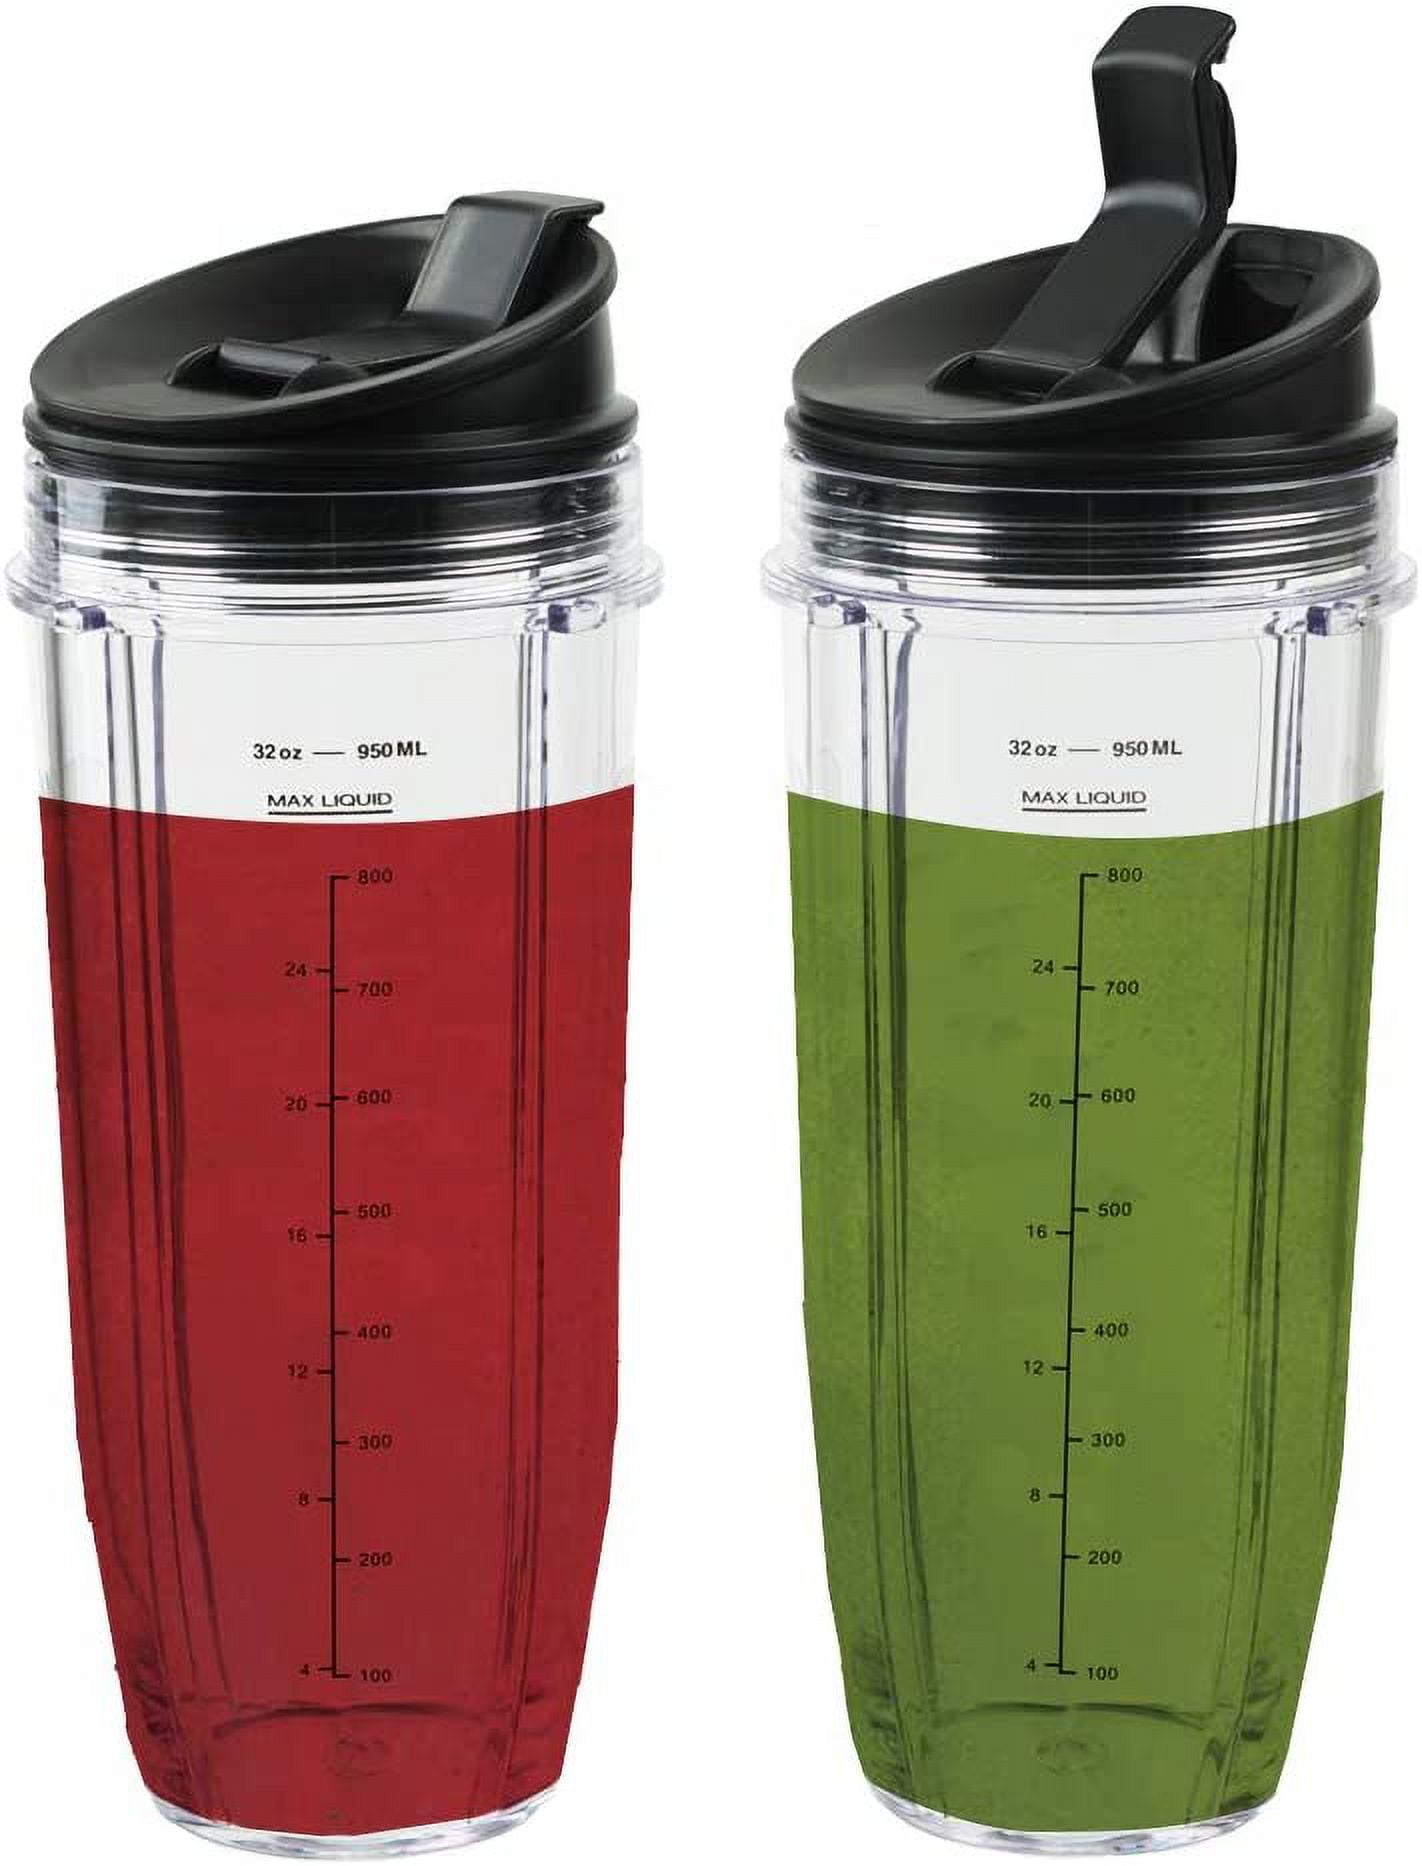  Replacement 18oz Nutri Ninja Blender Cup with Sip & Seal Lid  For BL450 BL456 BL480 BL482 BL640 BL642 BL682 BN401 BN751 BN801 Foodi SS101  SS151 SS351 SS401 SS400 Ninja Blender Auto